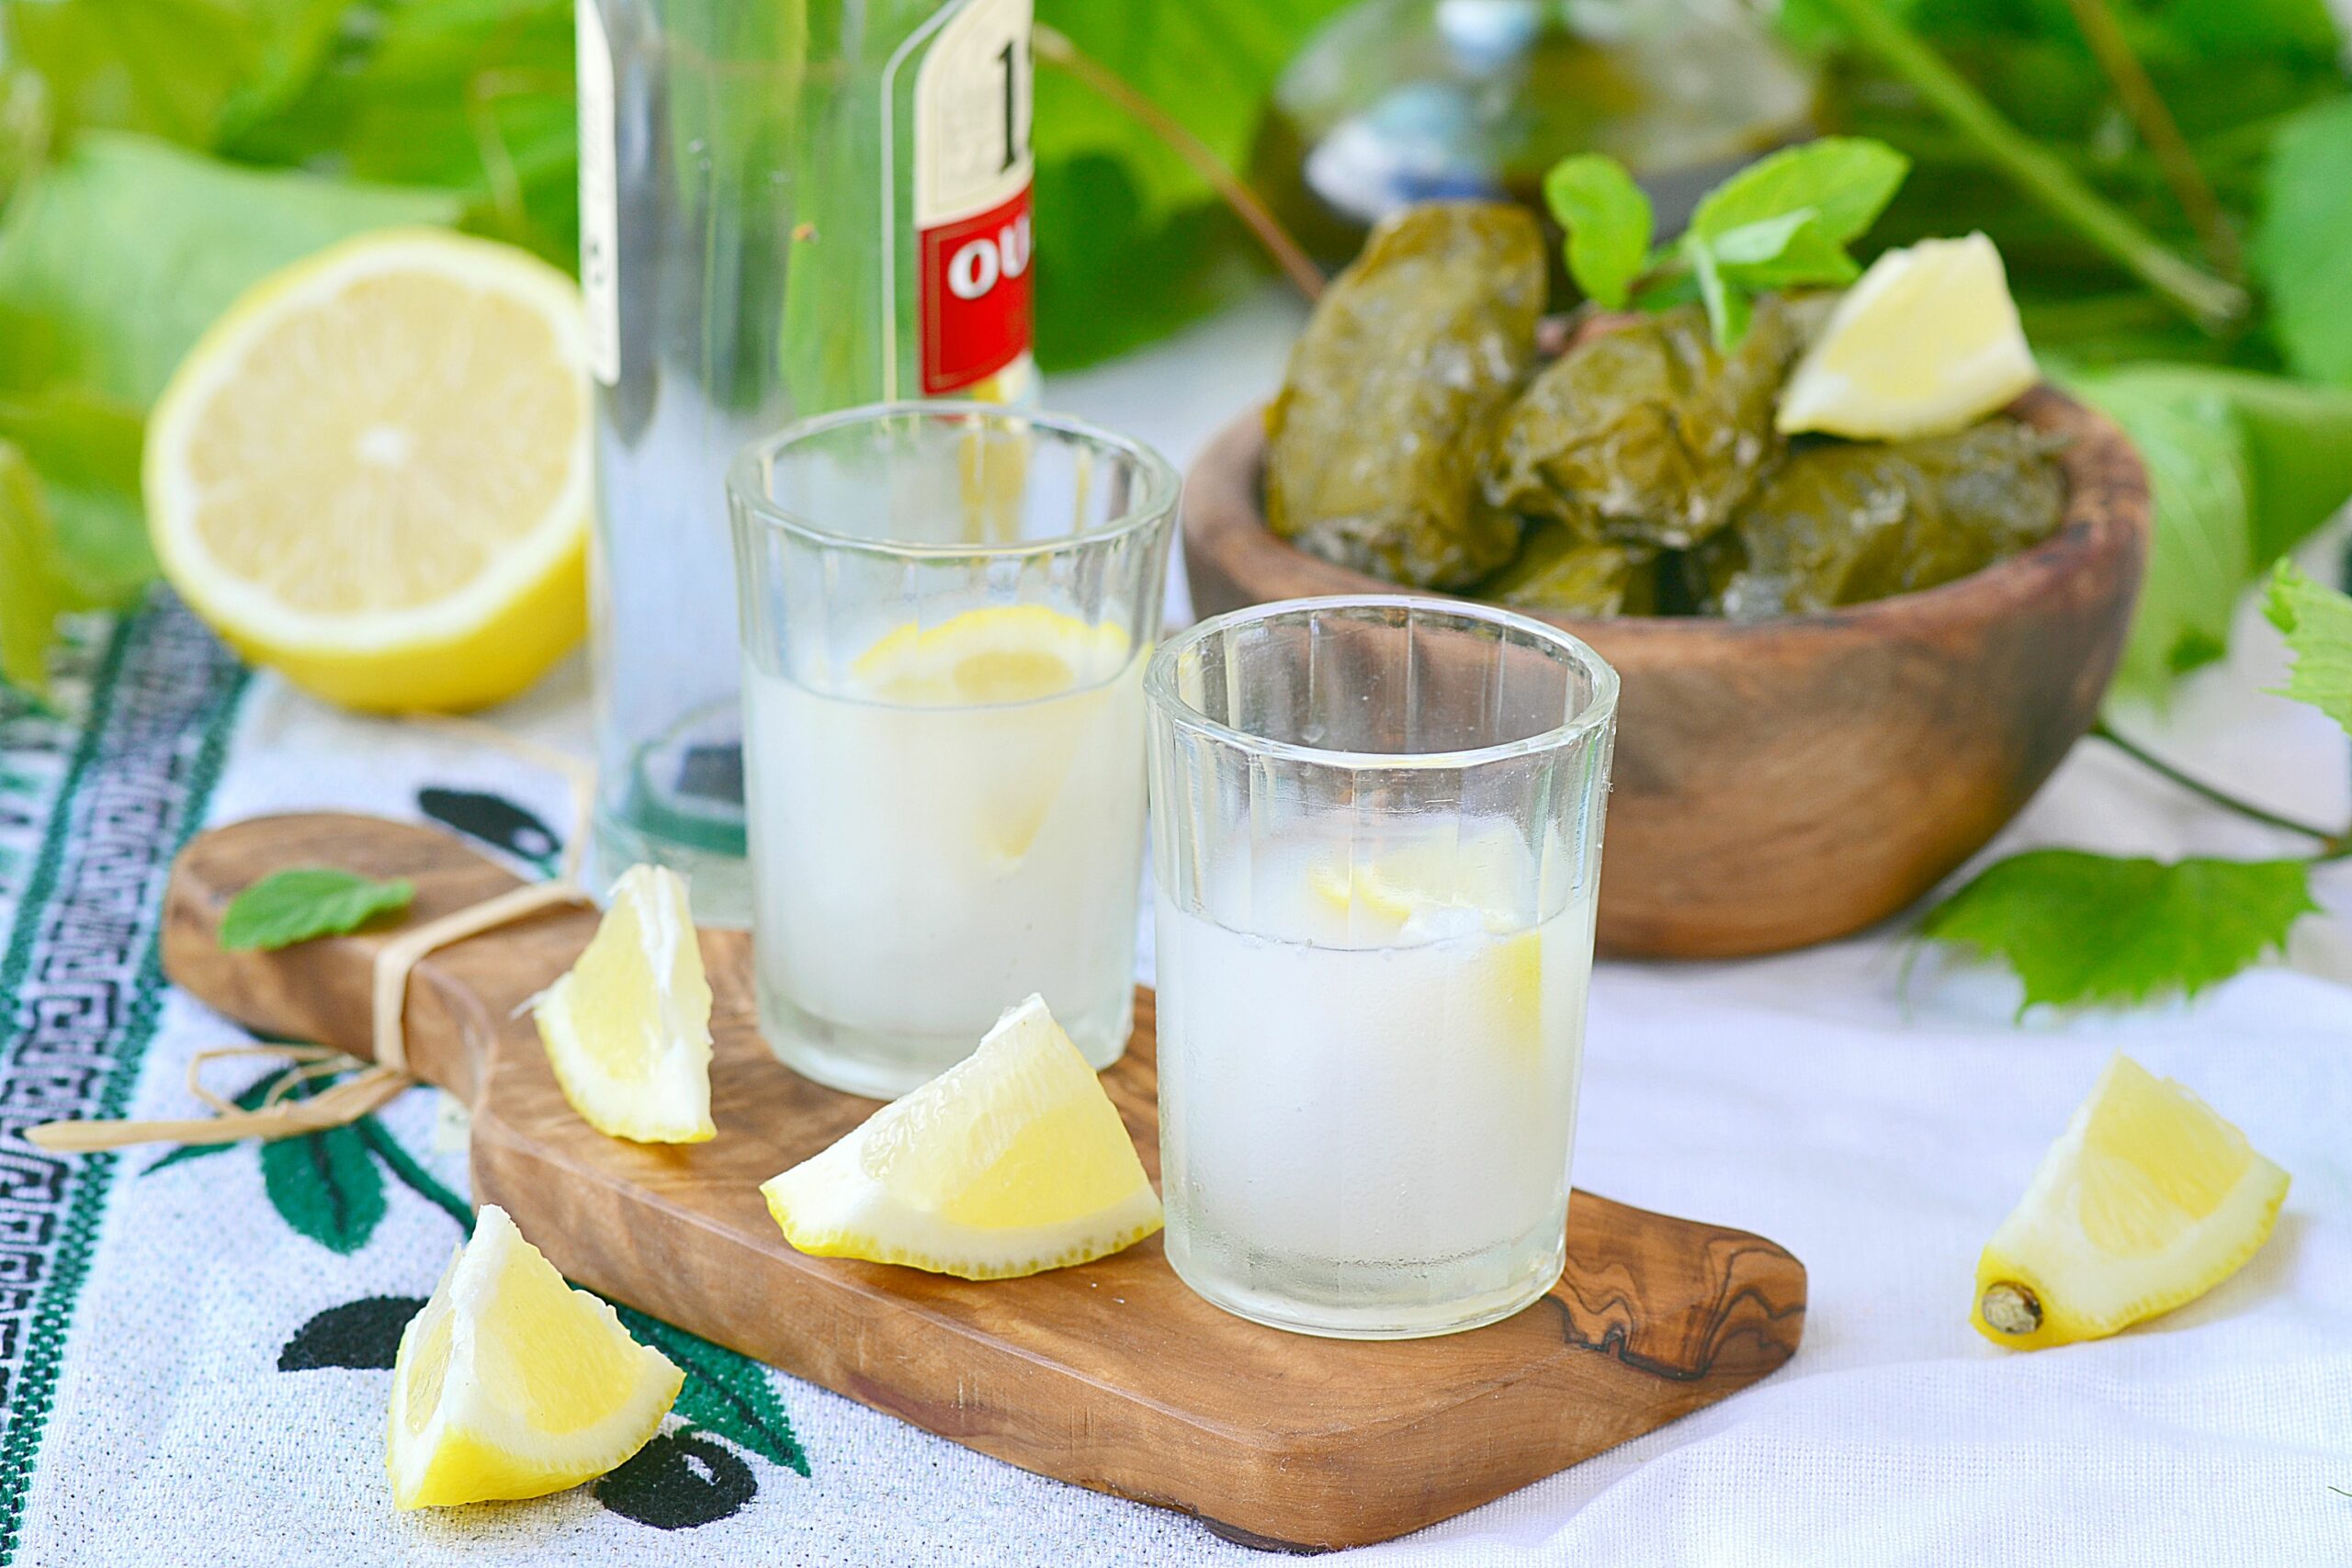 National drink of Greece - Ouzo